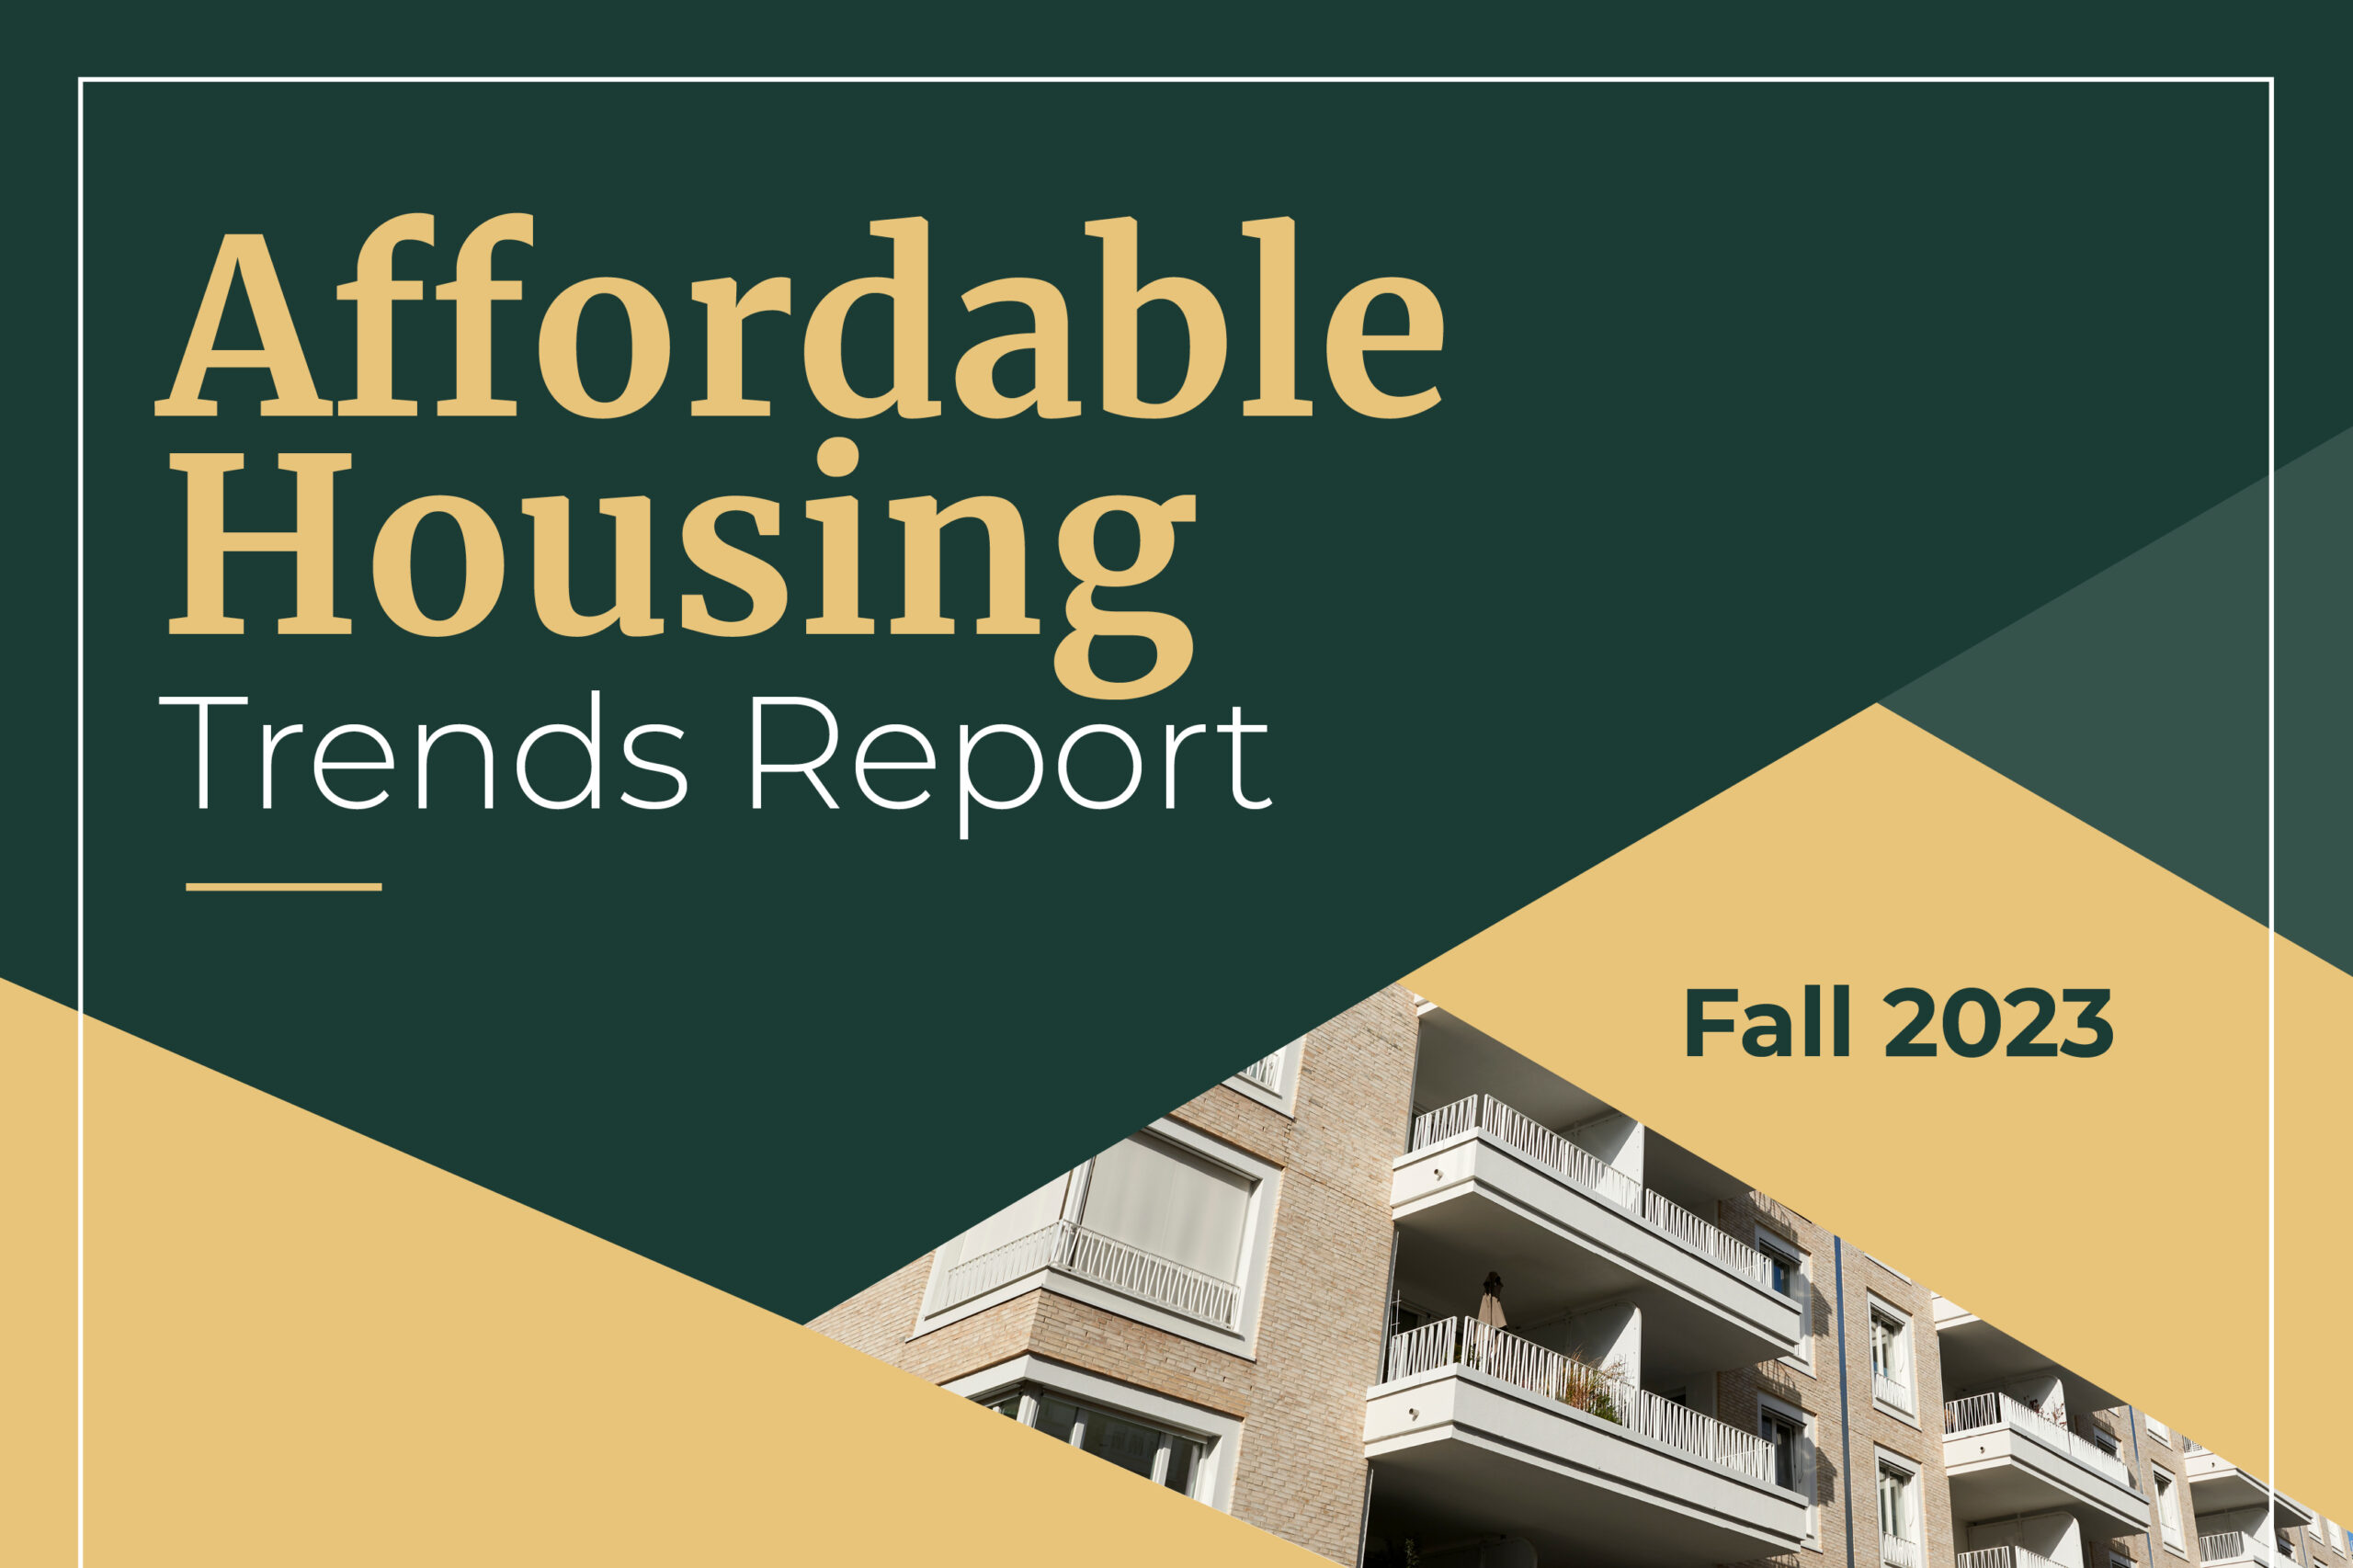 Affordable Housing Trends Report | Fall 2023